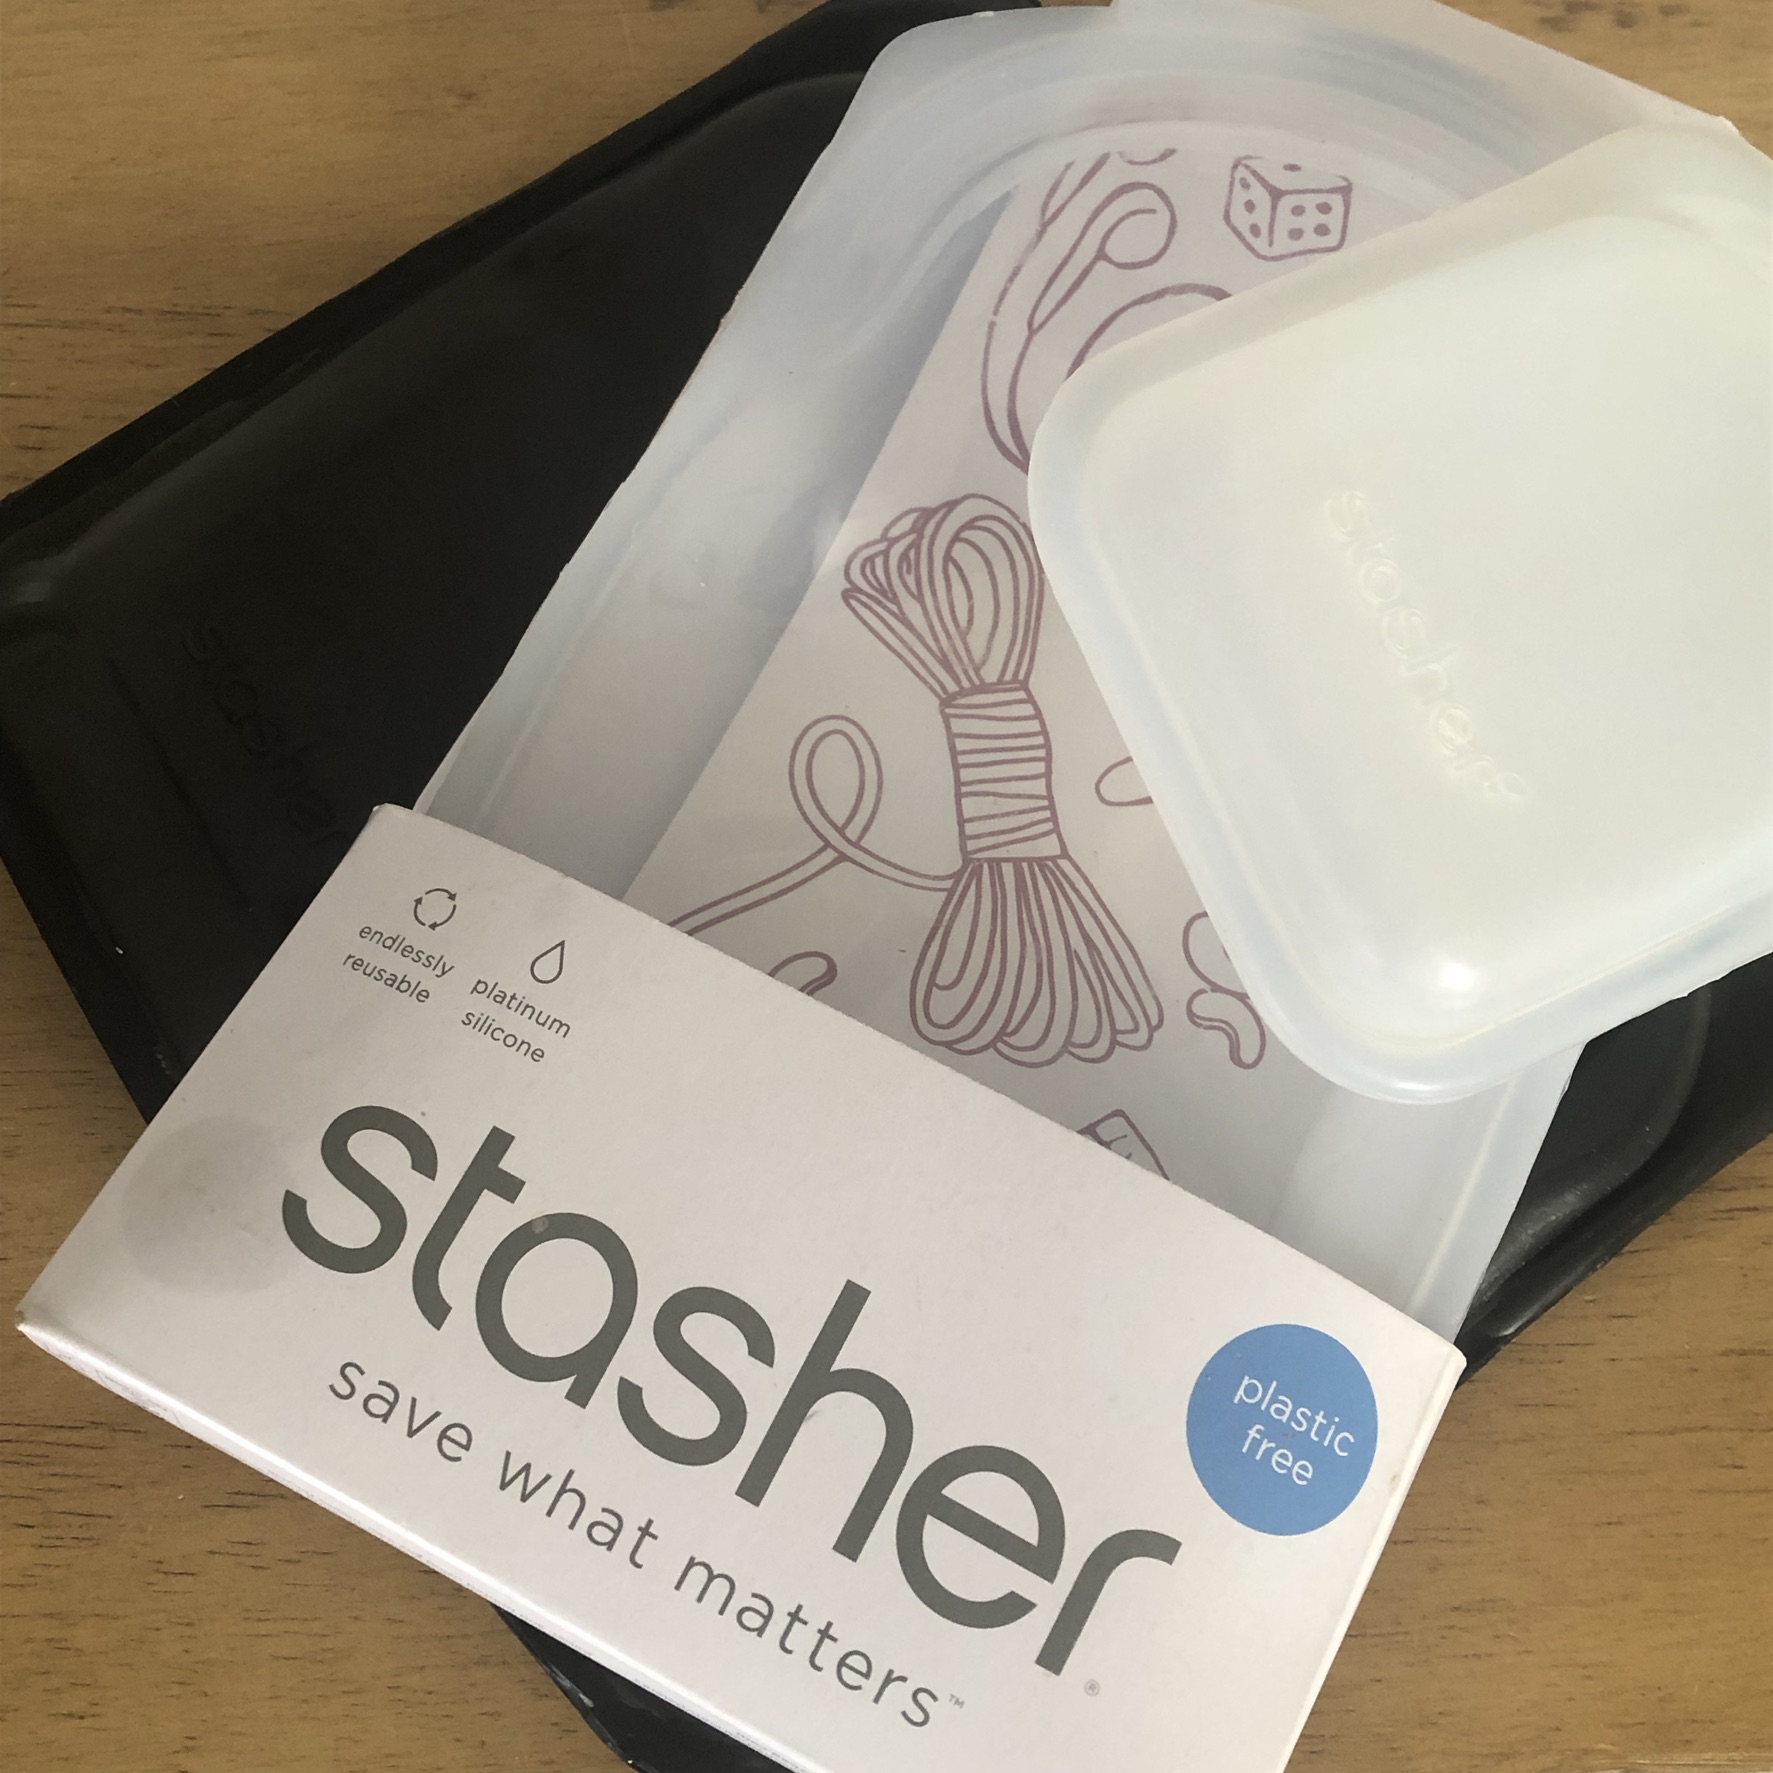 replace plastic sandwich bags with stasher bags